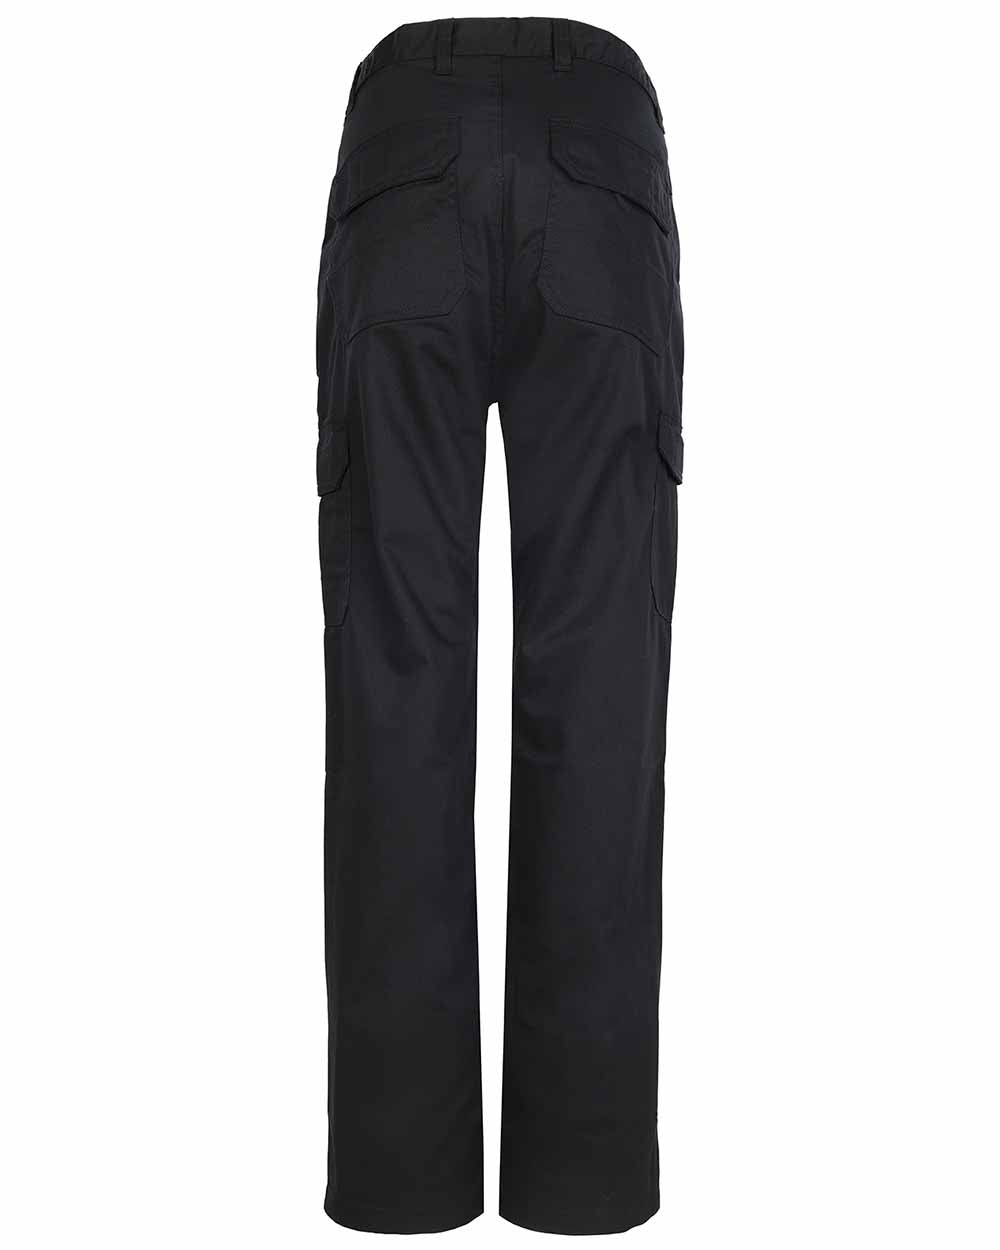 Back view Fort Workforce Trousers in Black 